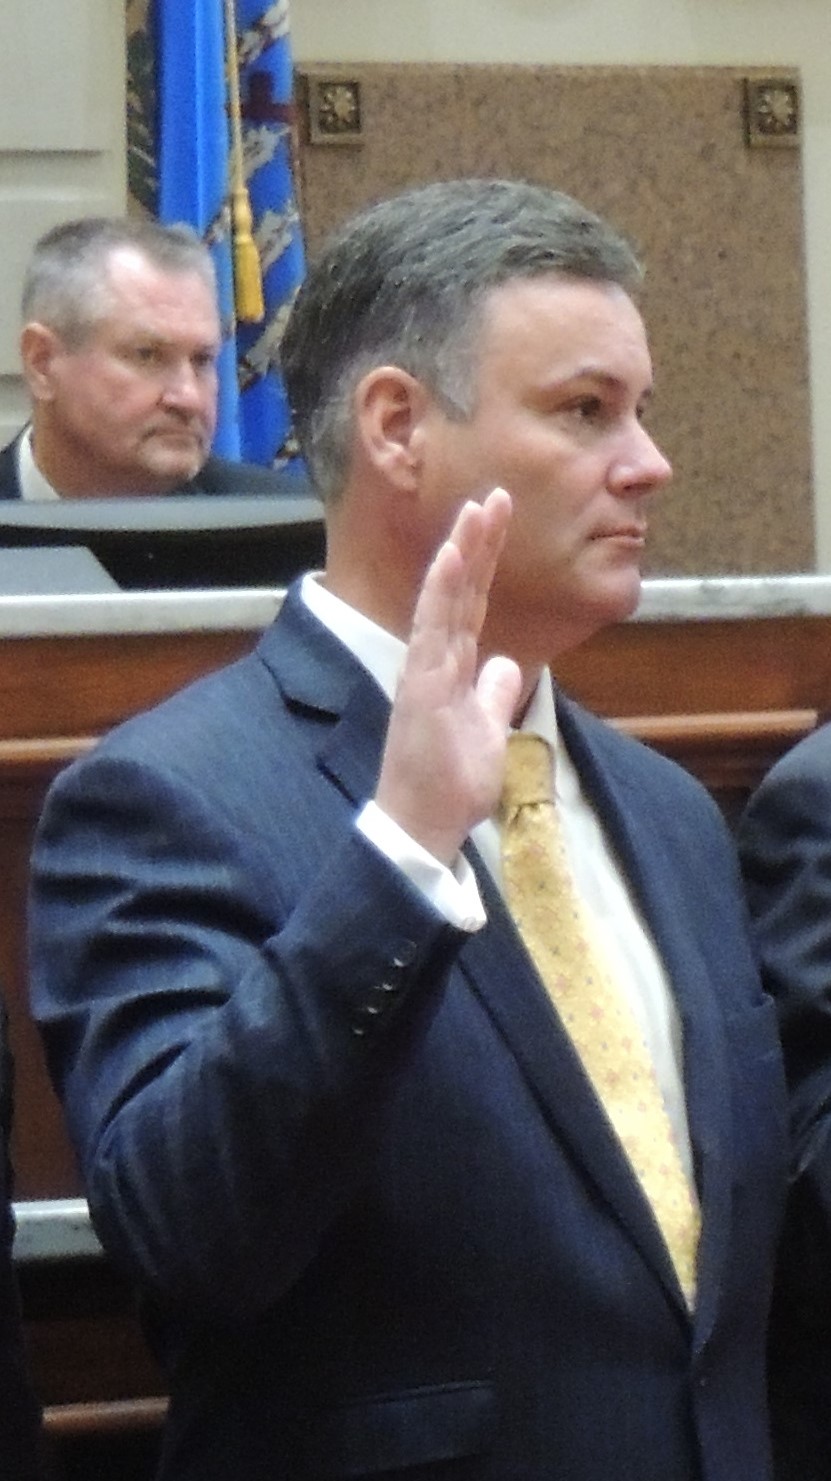 Sen. James Leewright takes oath of office at the state Capitol on Wednesday